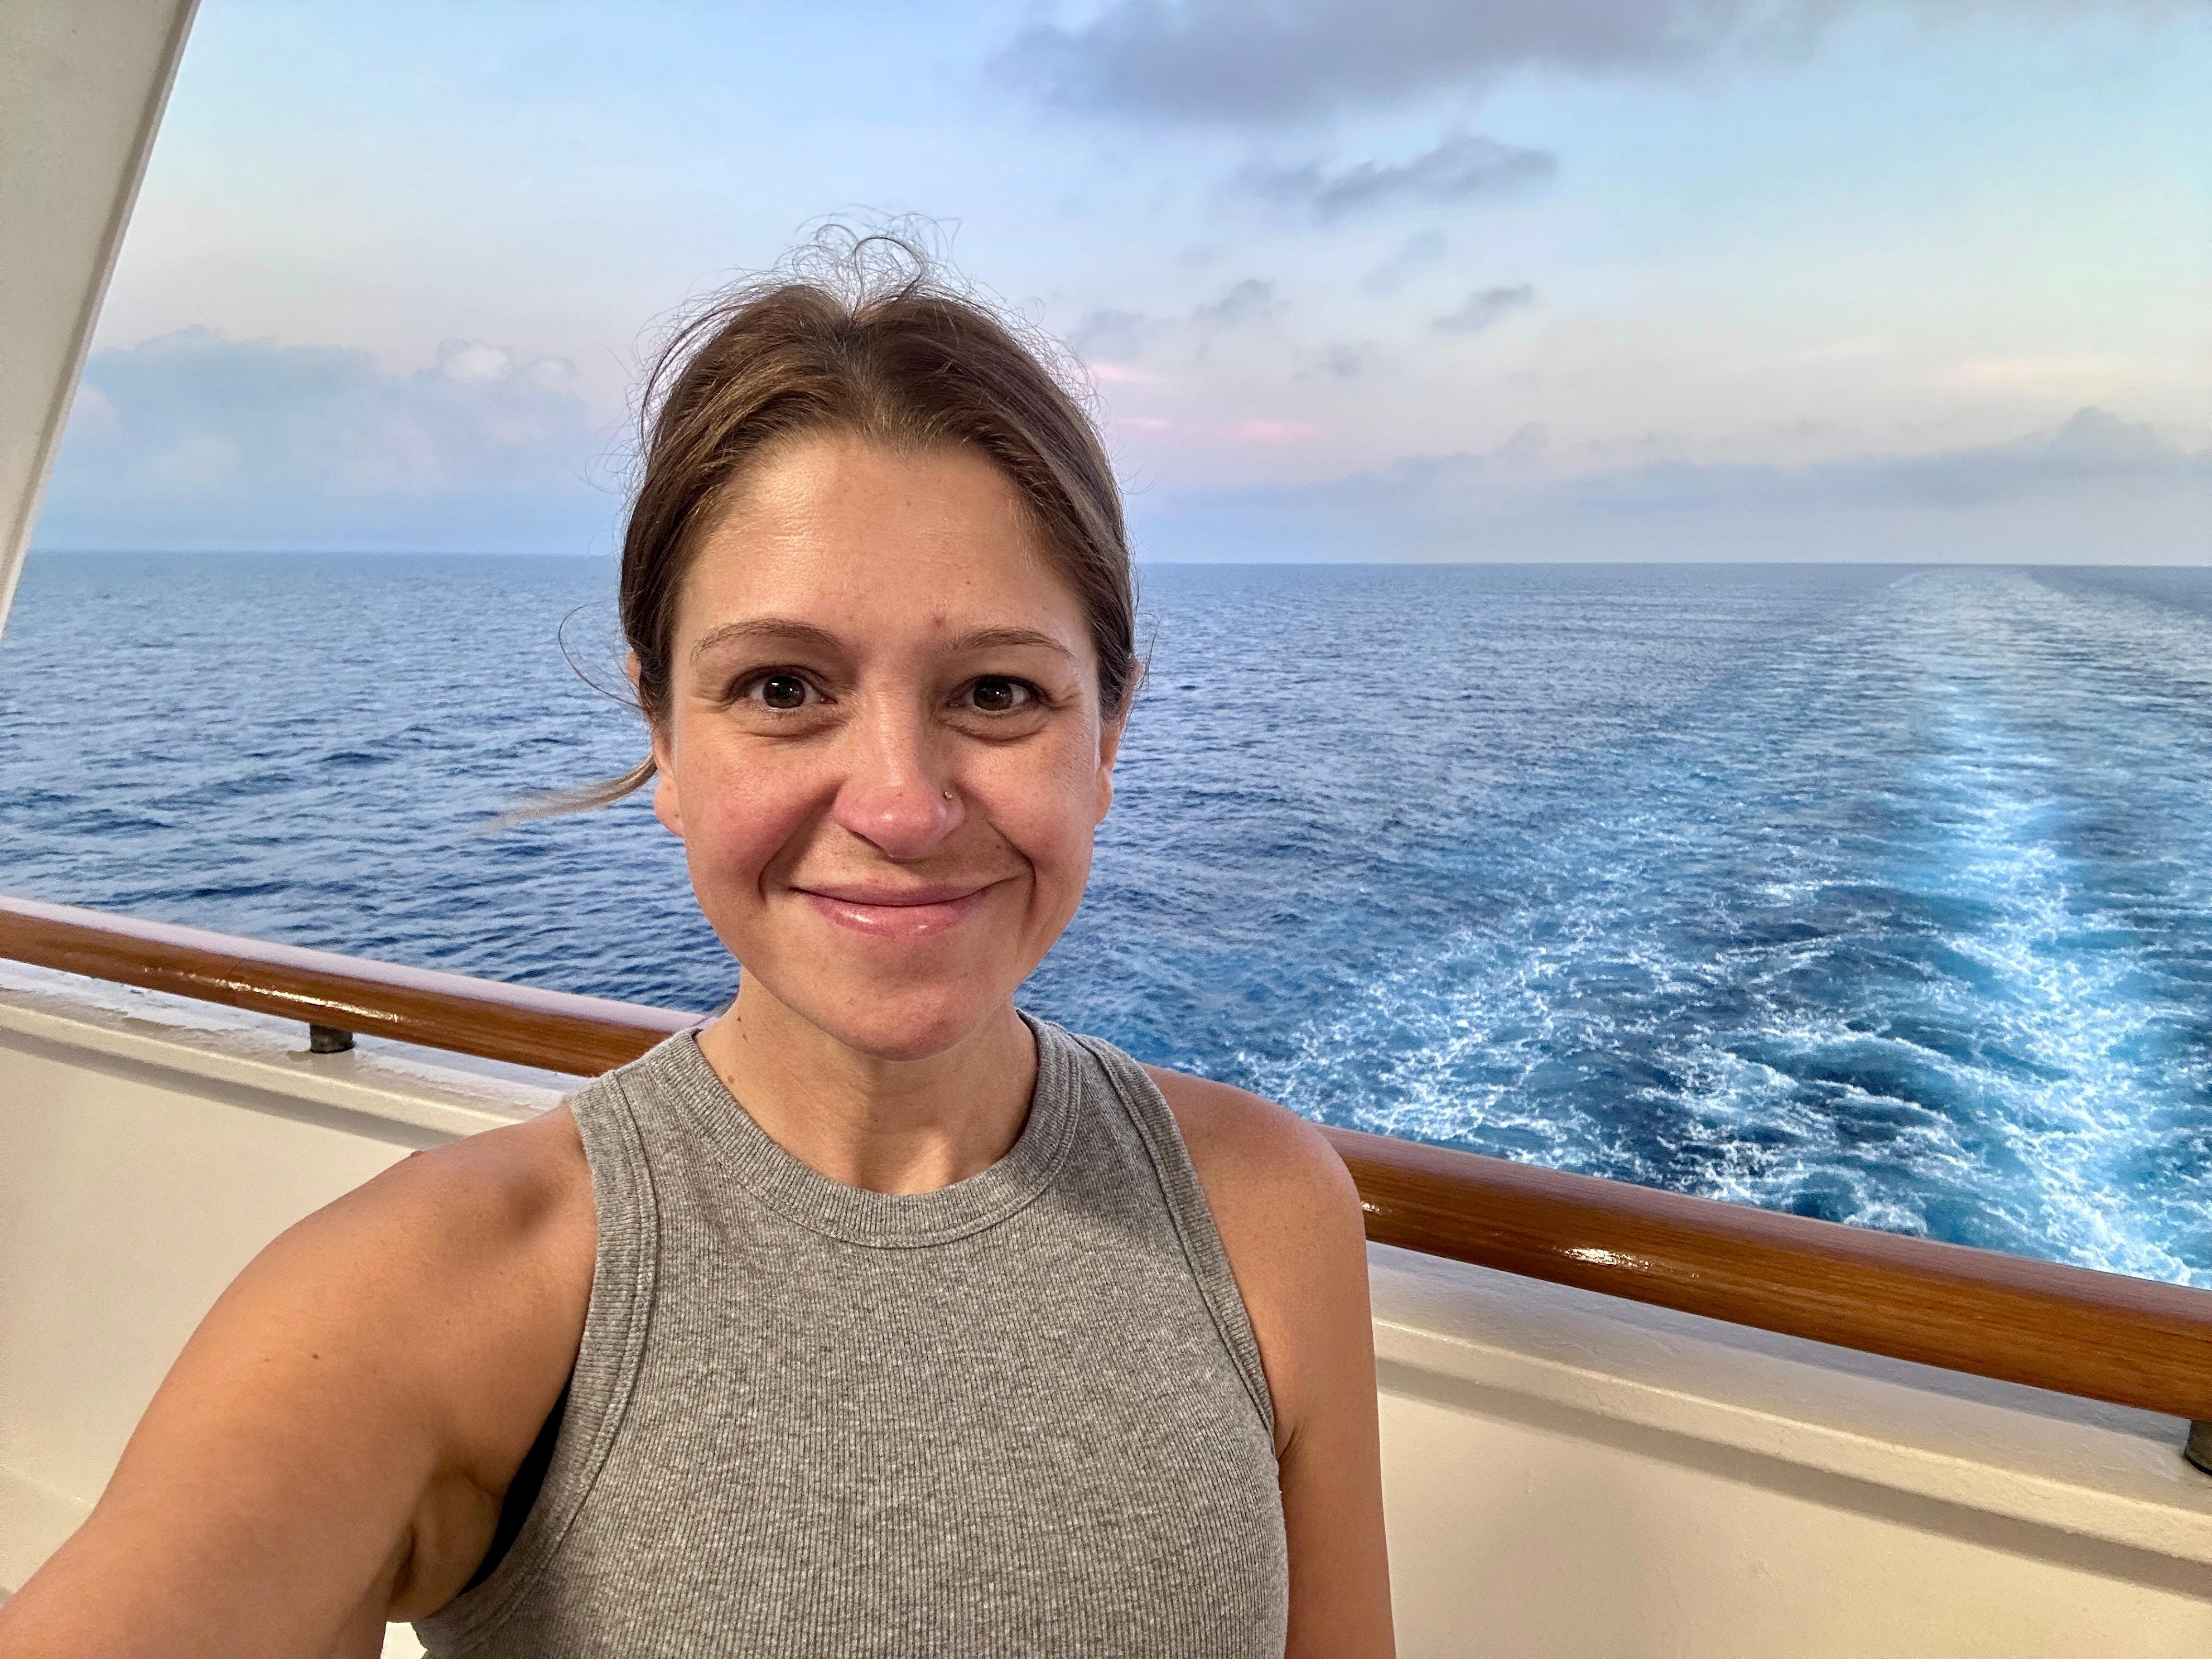 <p>Each morning on a cruise, I set an alarm for 7 a.m. and wake up before my family to go for a walk around the ship. </p><p>The Caribbean Princess had a jogging track on one of the lower decks, and walking there while taking in sweeping ocean views was a beautiful way to start my days and burn off the stress caused by being around other people. </p><p>Although our ship offered a fitness center and group fitness classes, I found the peaceful outdoor track to be the better option for my introverted self. </p>